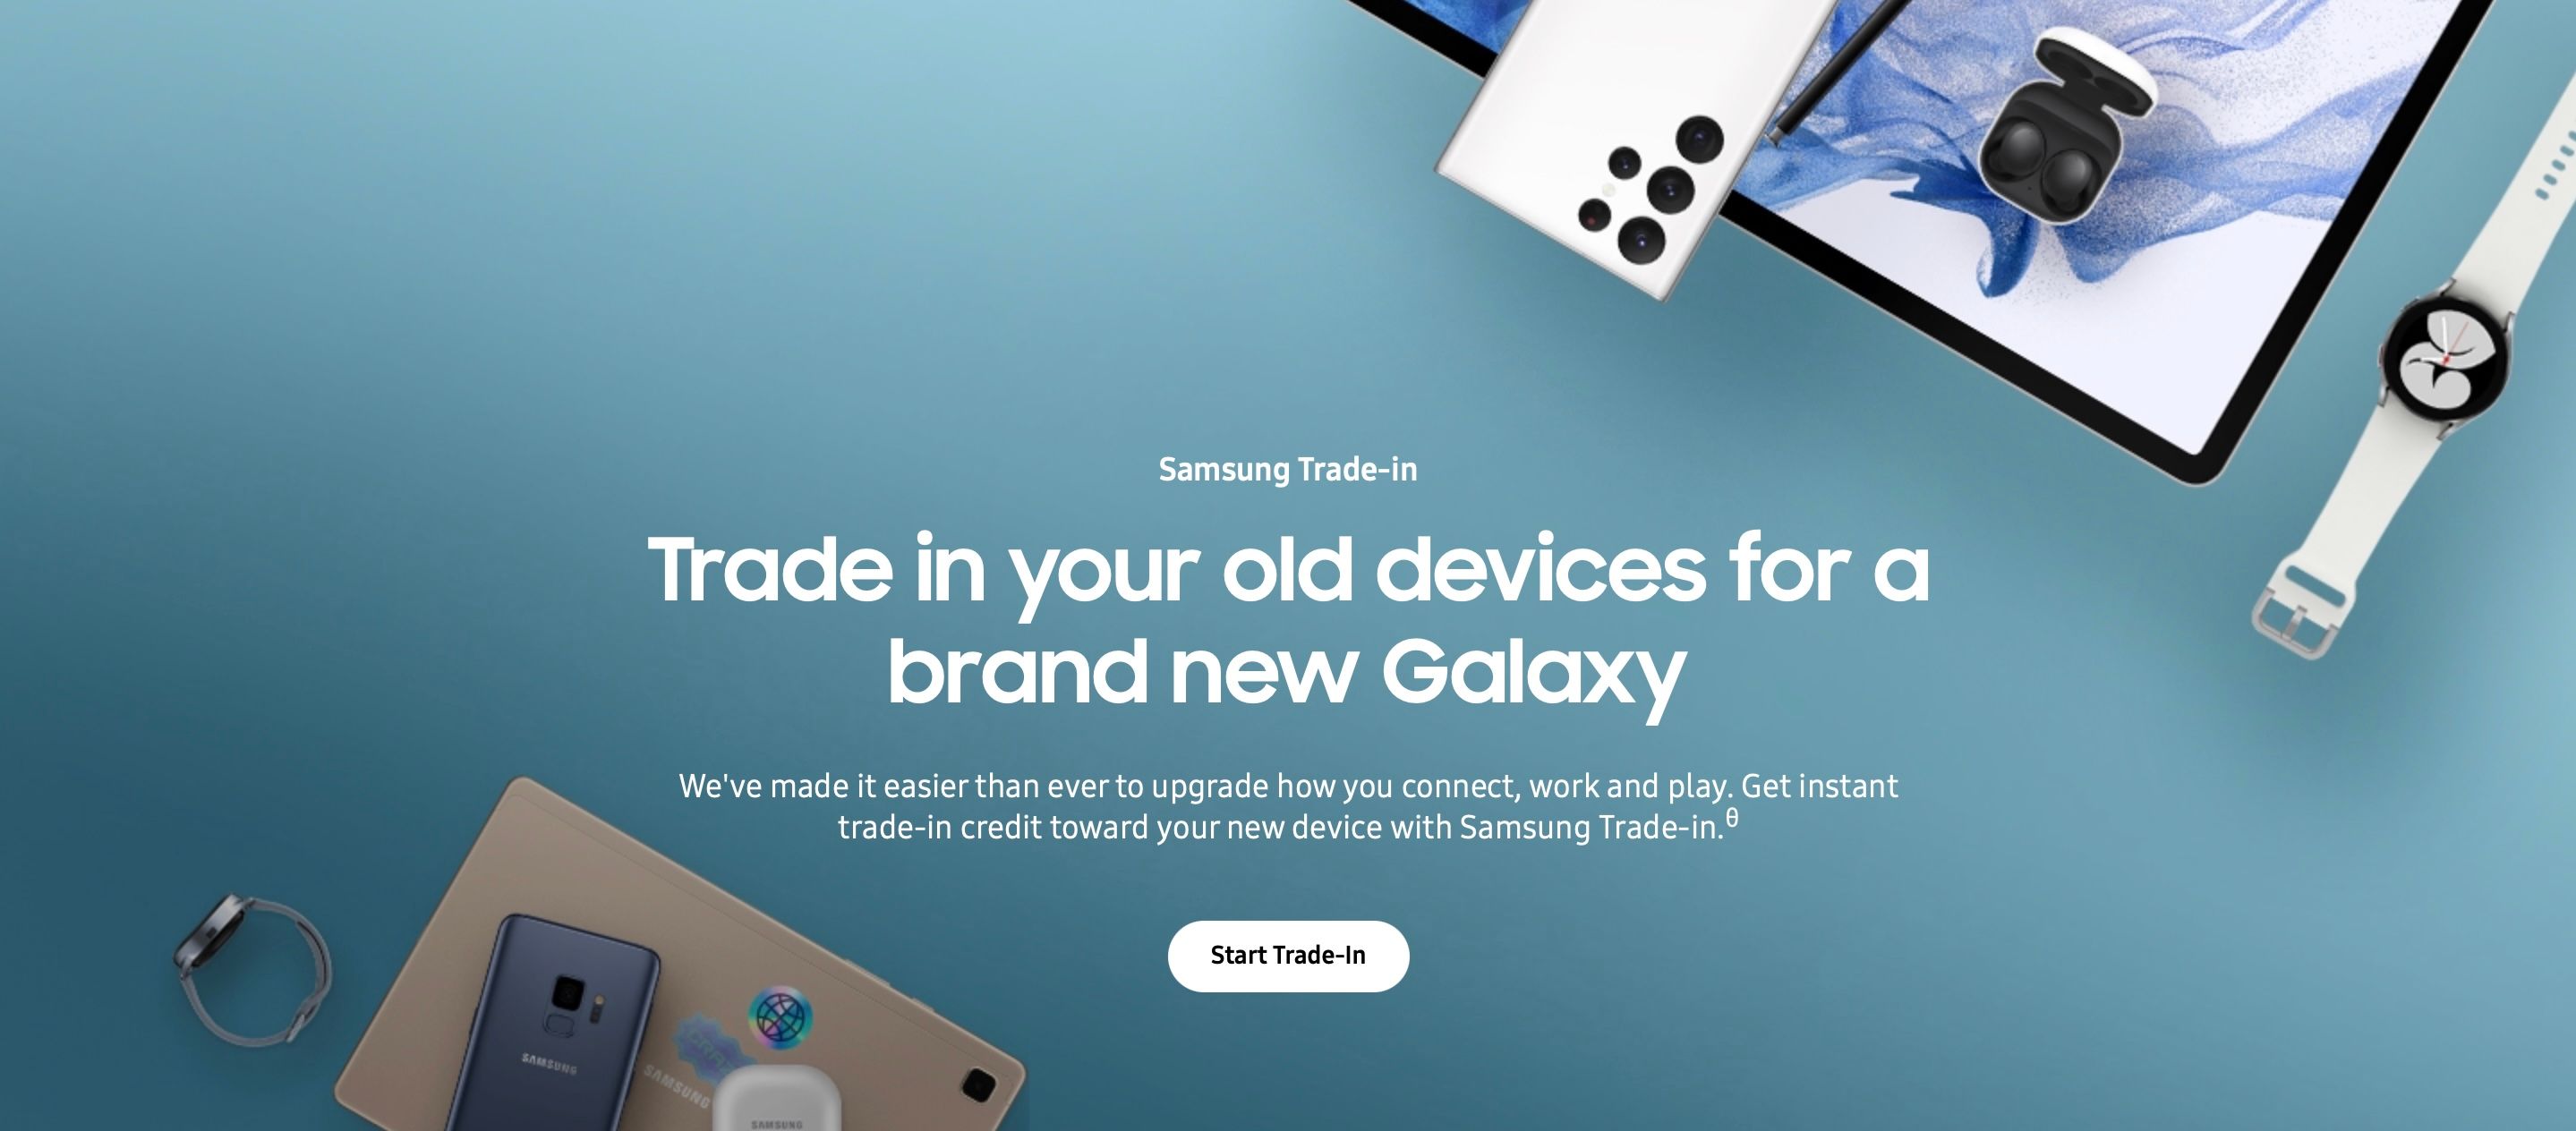 Samsung\'s Trade-In Page on their Website